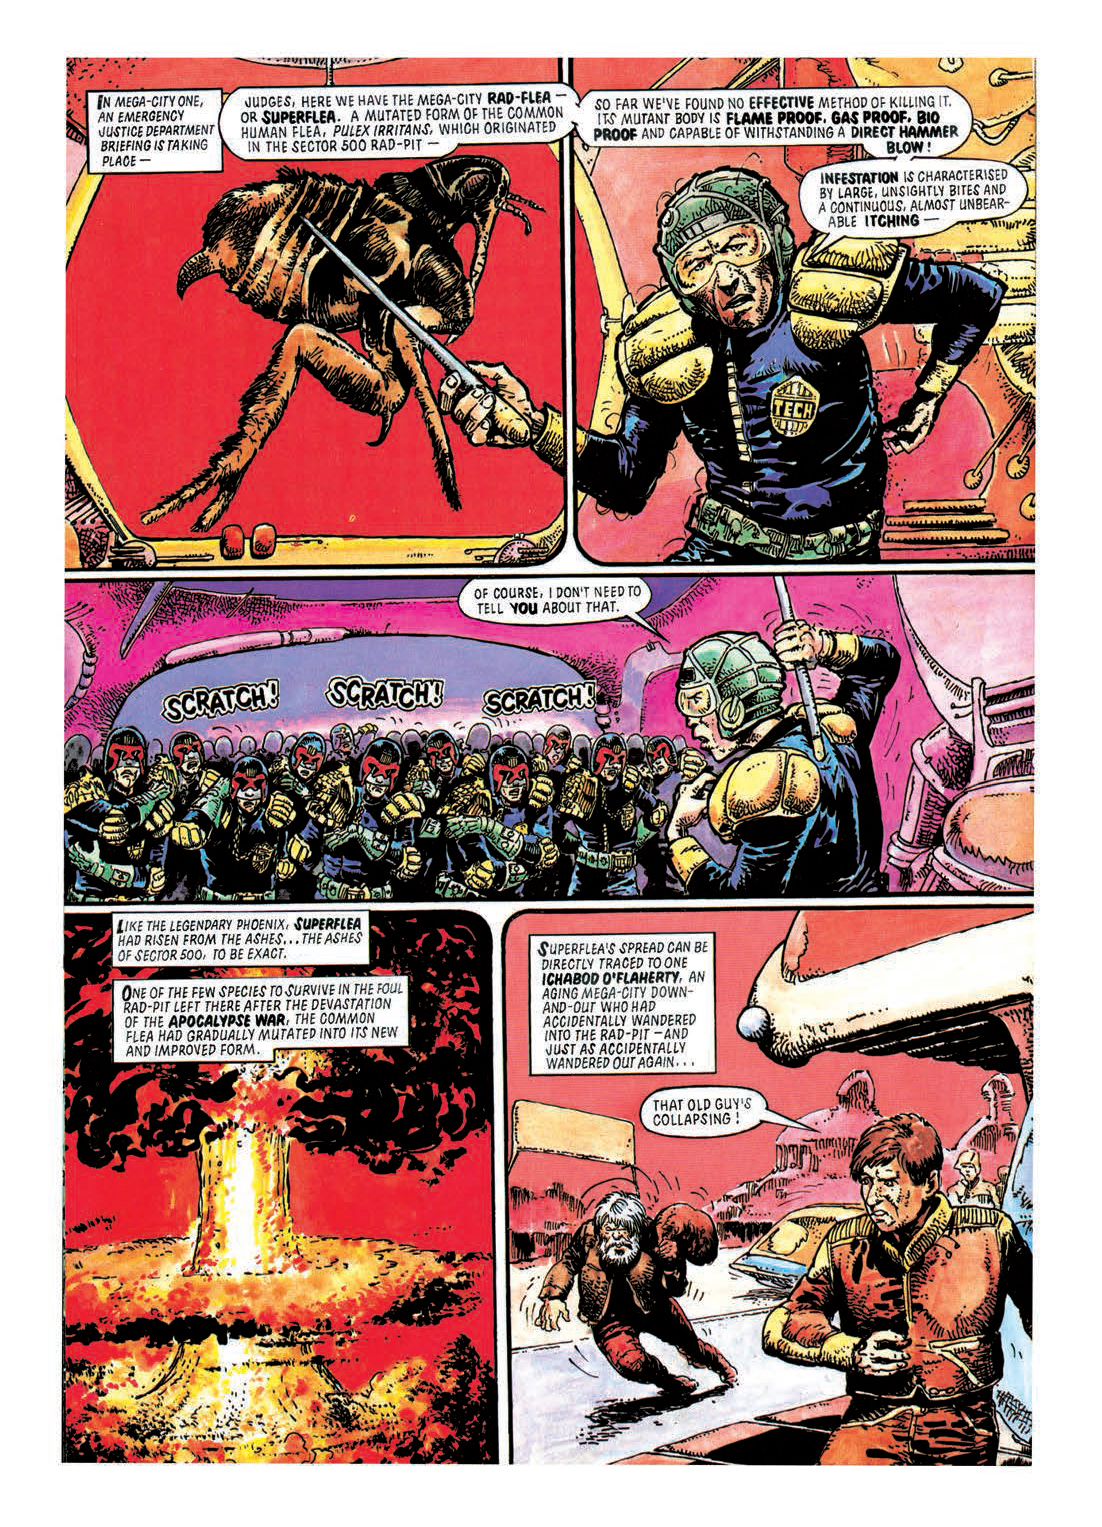 Read online Judge Dredd: The Restricted Files comic -  Issue # TPB 1 - 176